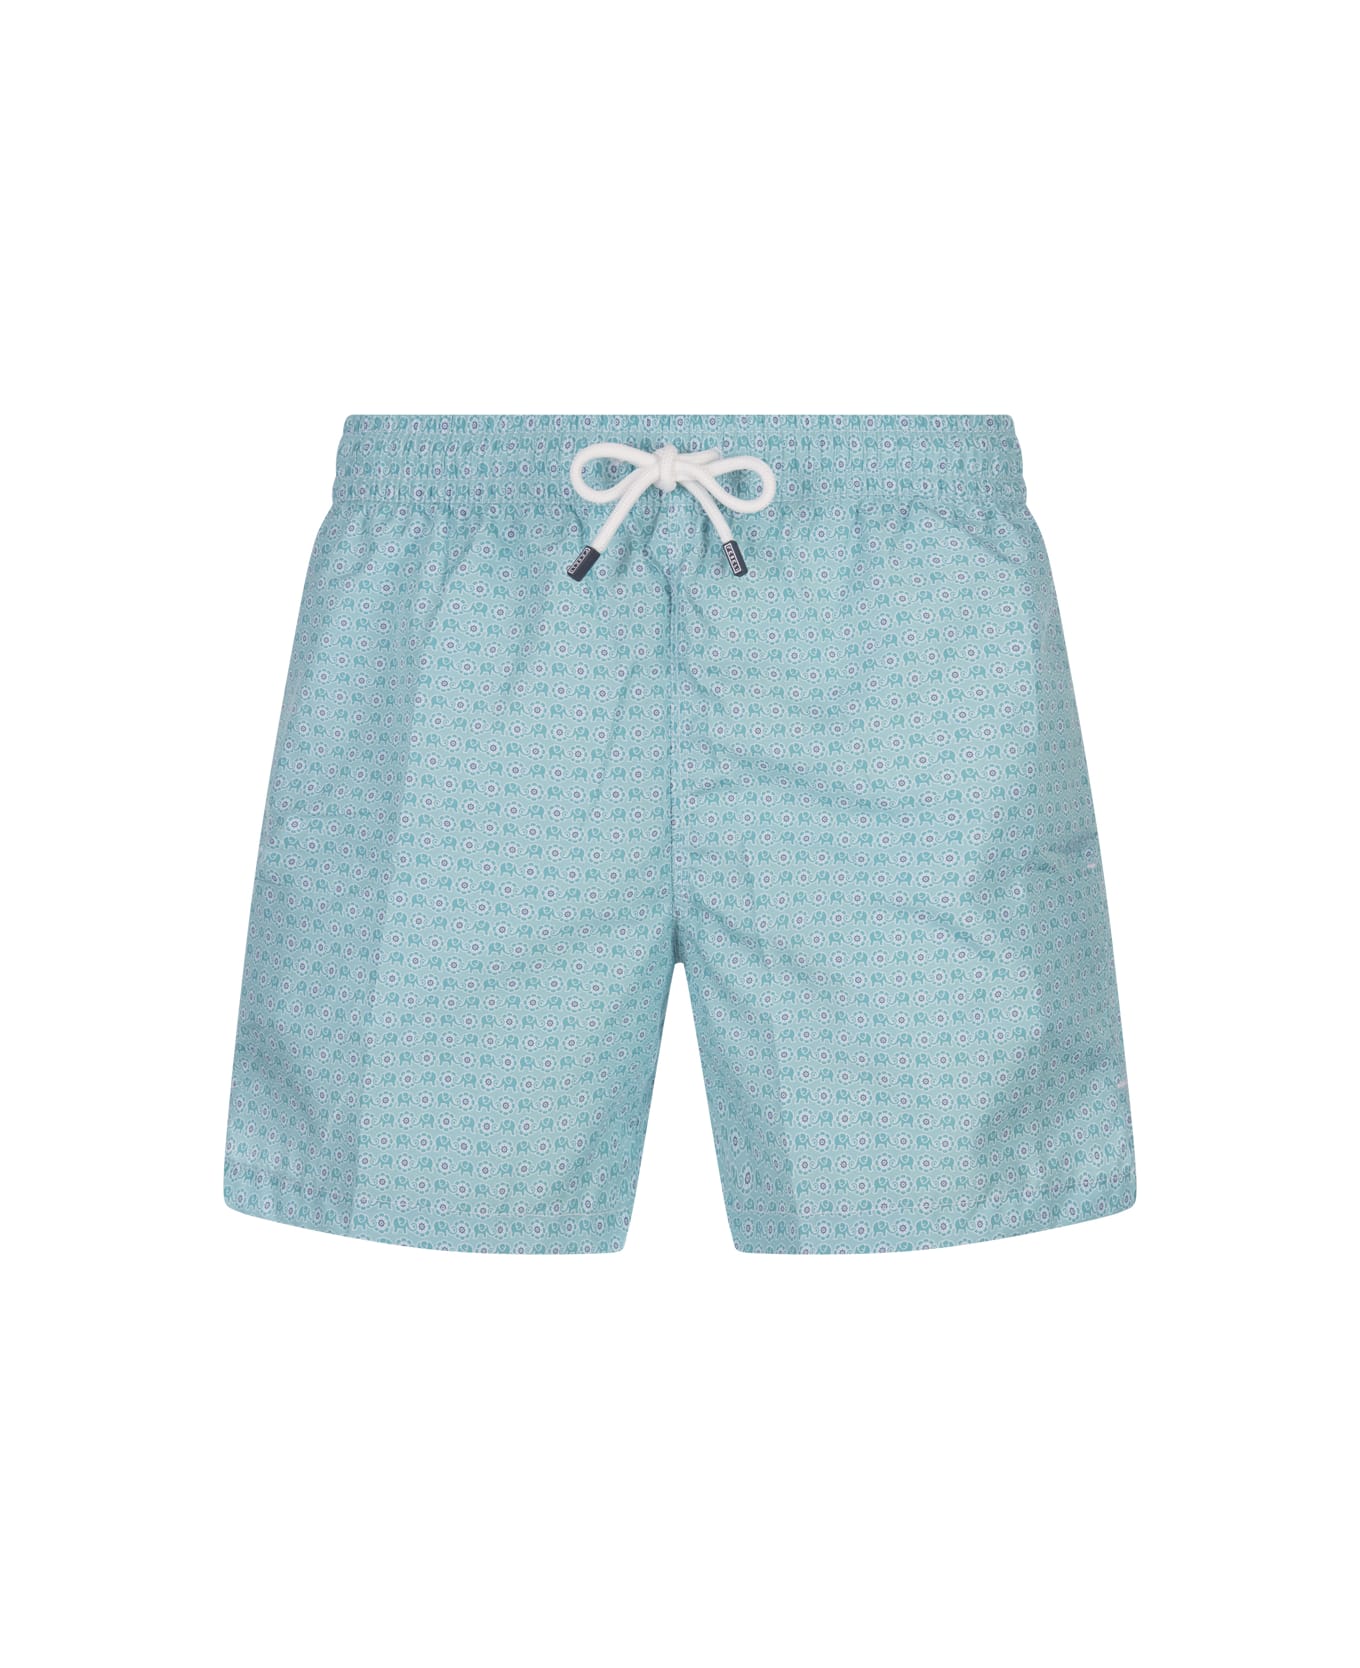 Fedeli Turquoise Swim Shorts With Elephants And Flowers Pattern - Green